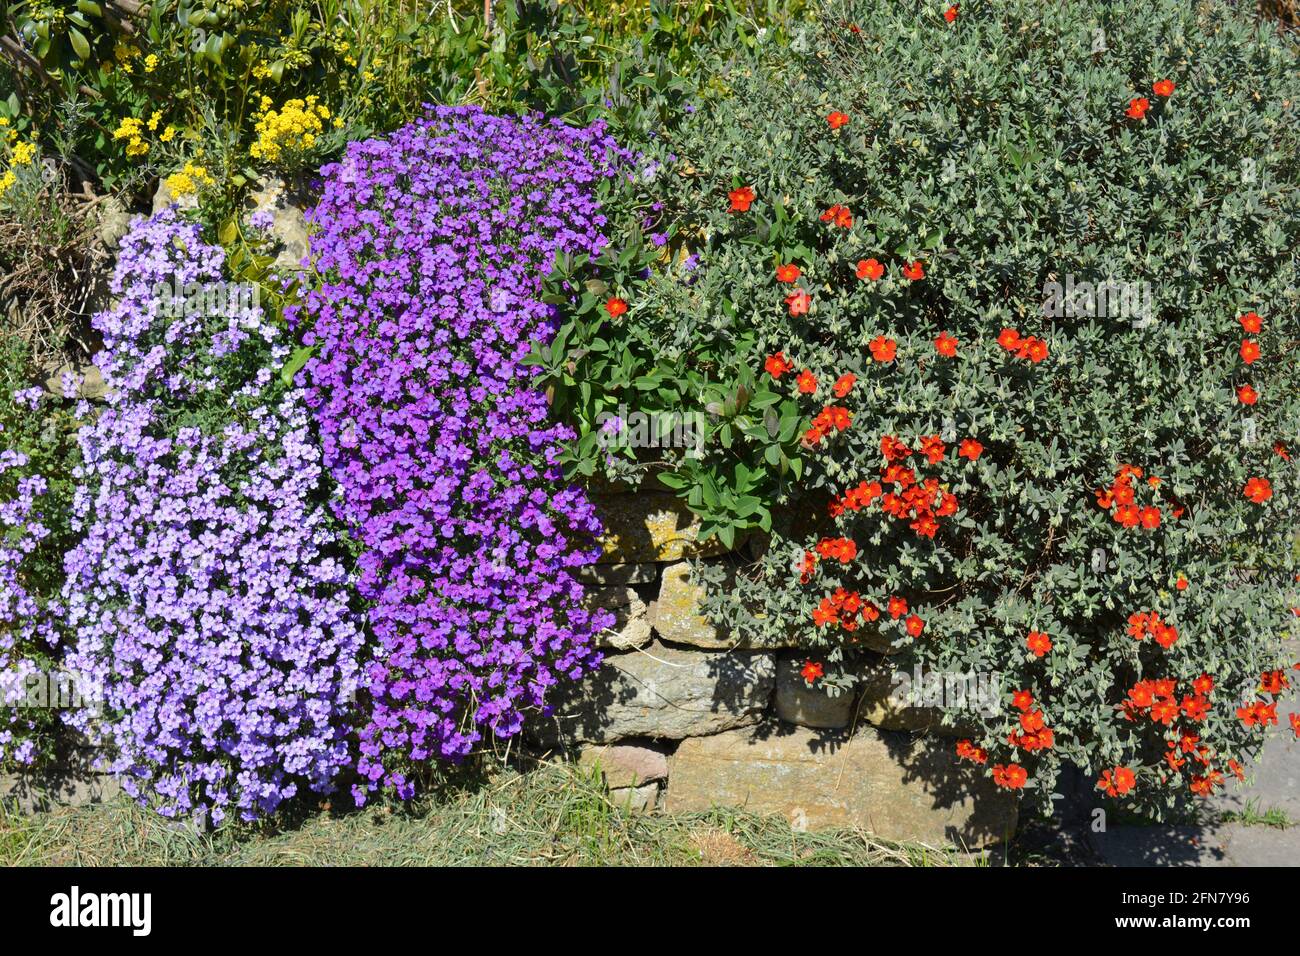 Colourful plants flowering in drystone wall, including purple Aubretia and red Rockrose Stock Photo